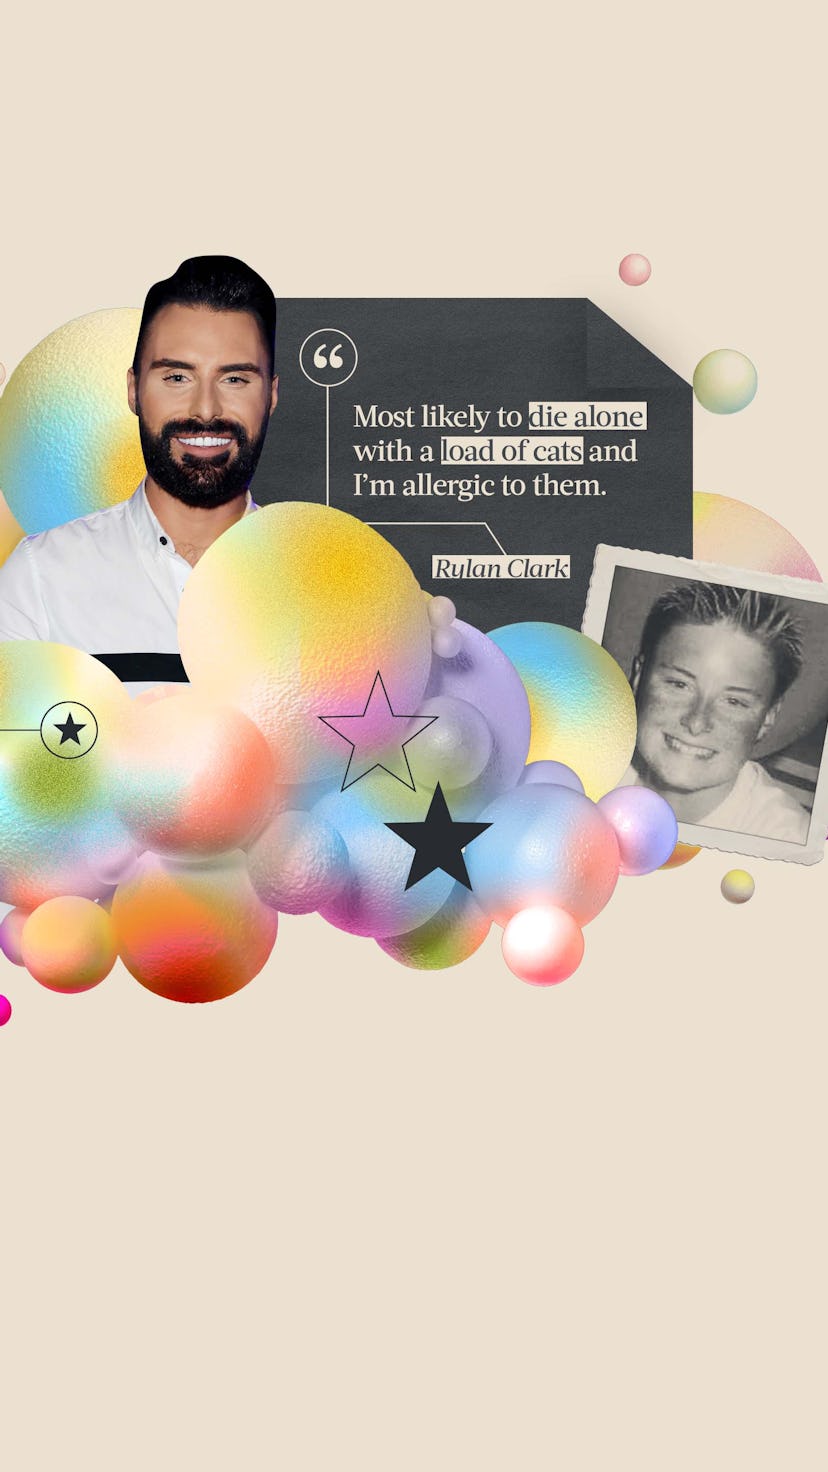 A collage of Rylan Clark, his quote about dying with cats and his childhood photo